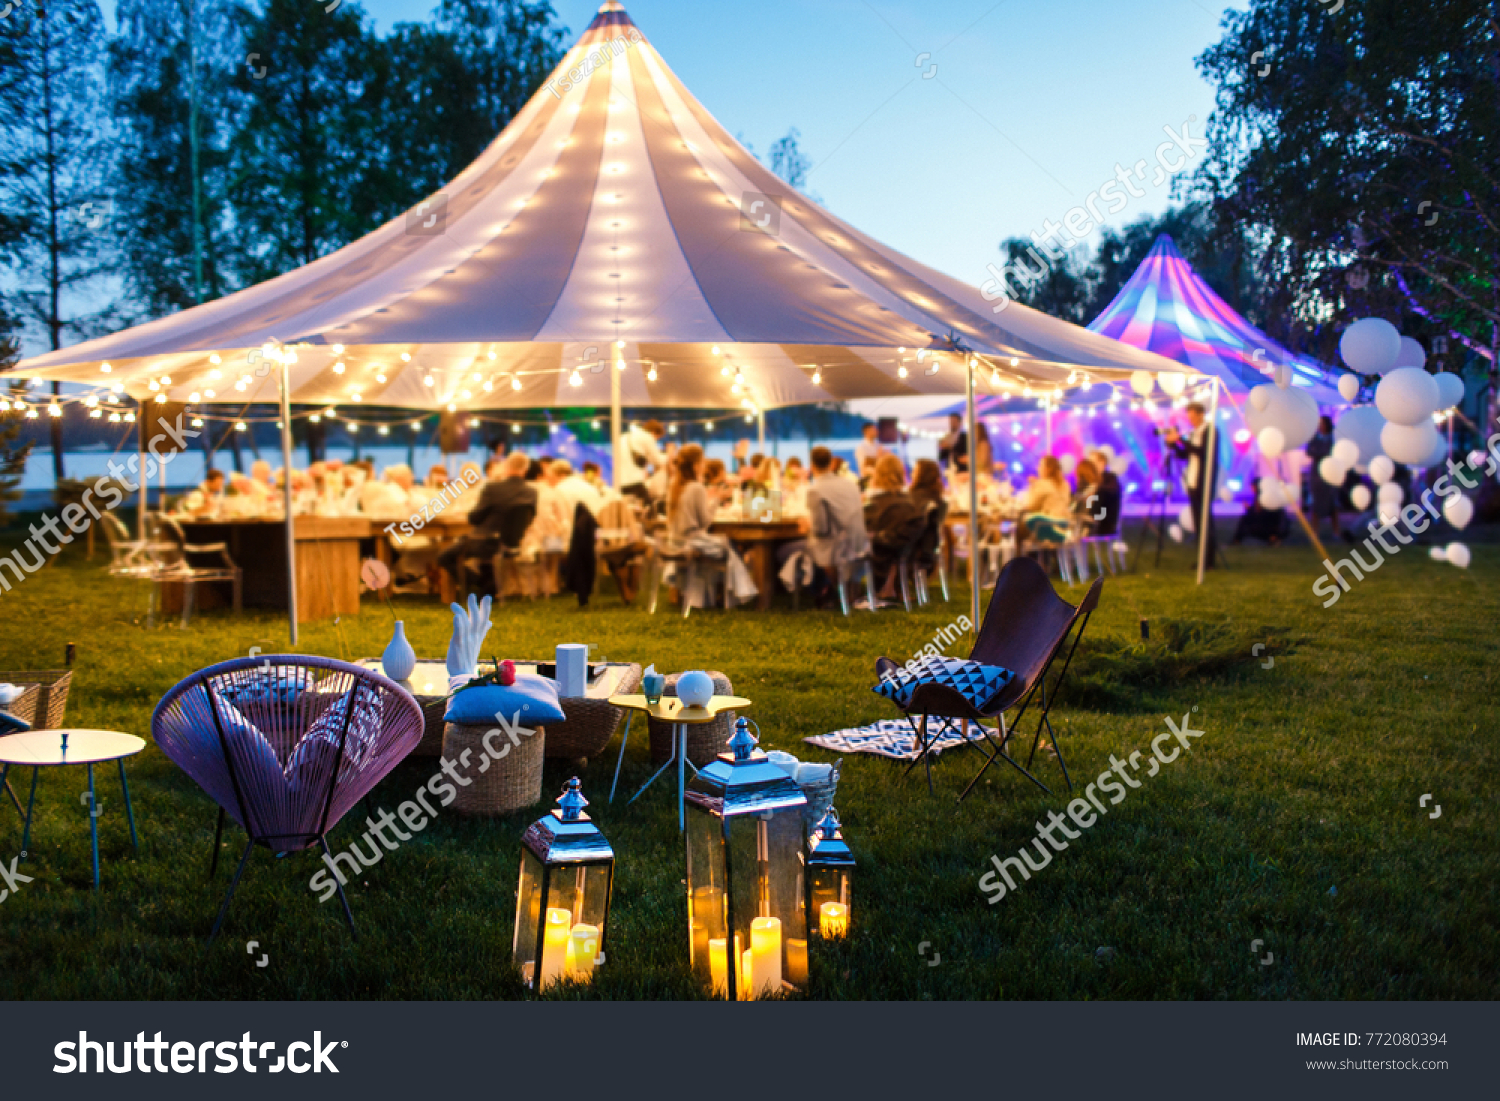 Colorful wedding tents at night. Wedding day. #772080394